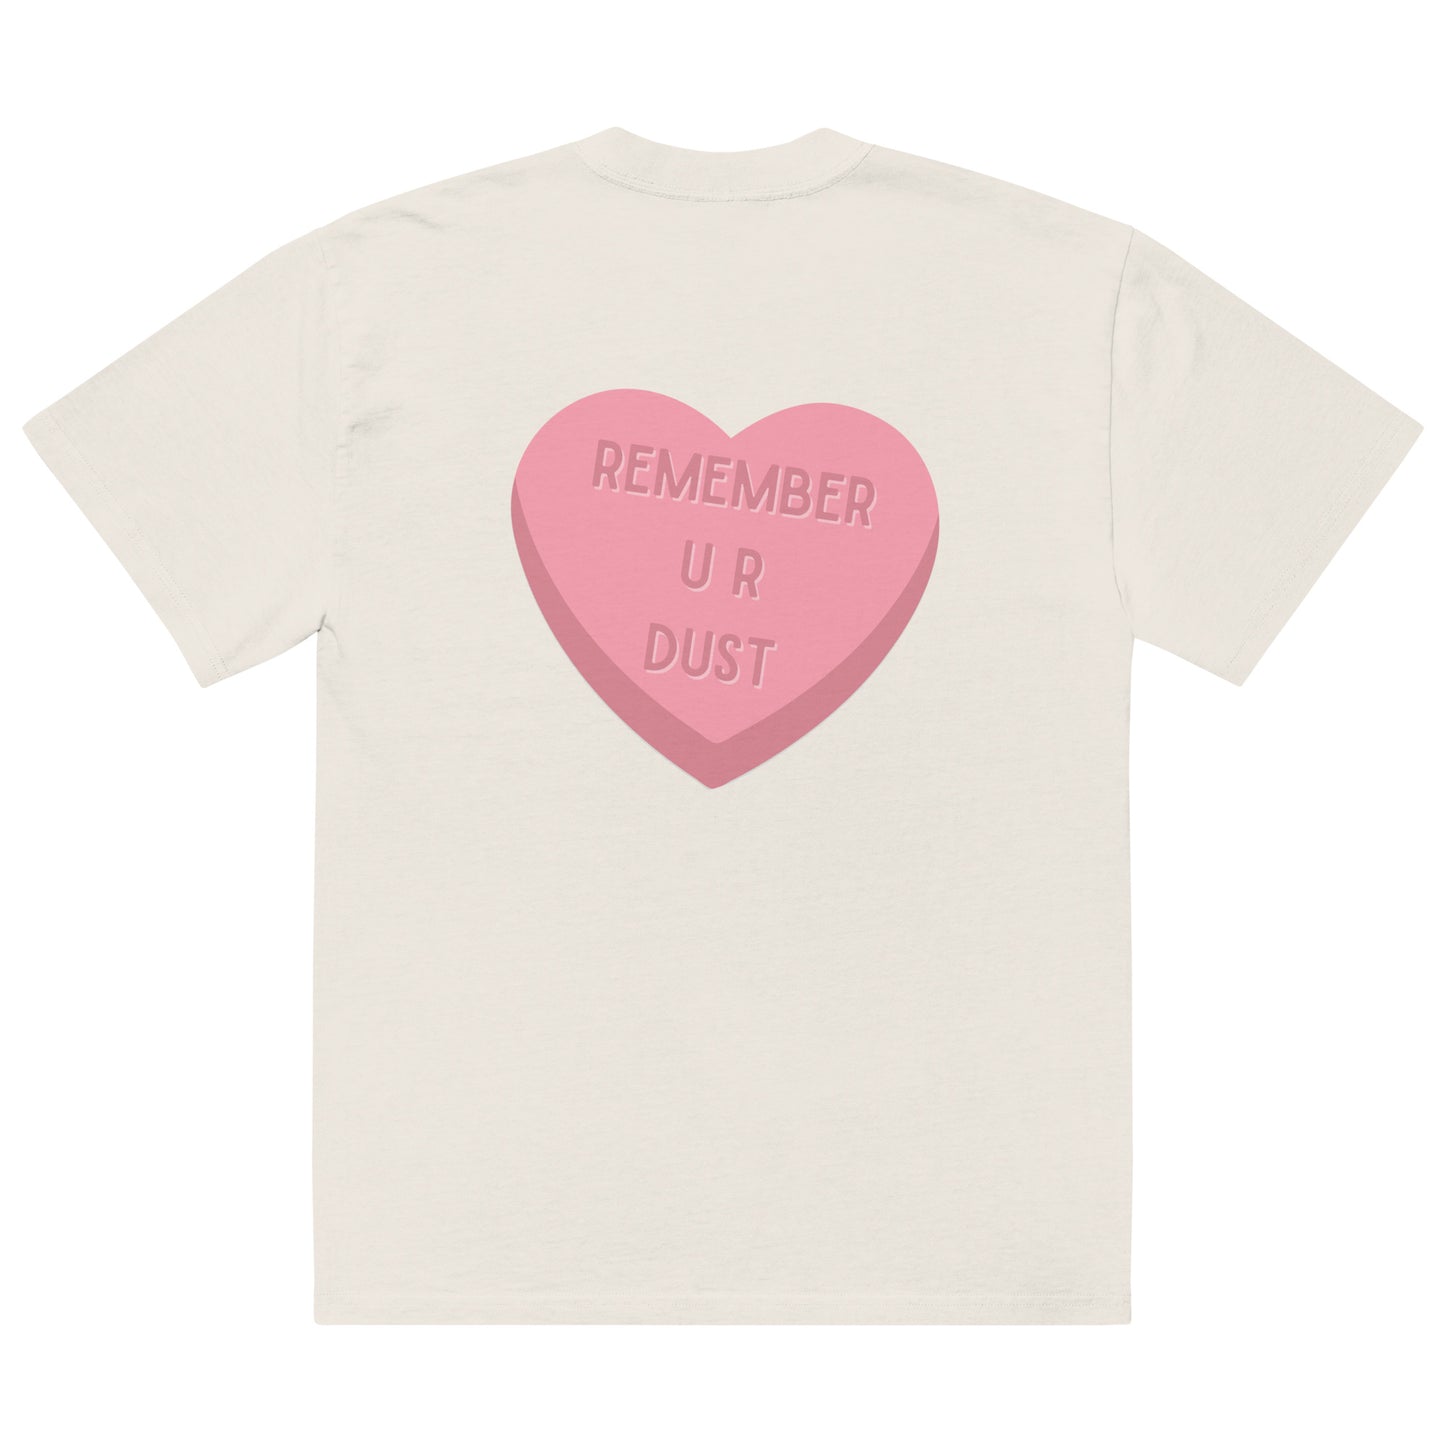 Remeber you are DUST - Oversized faded t-shirt